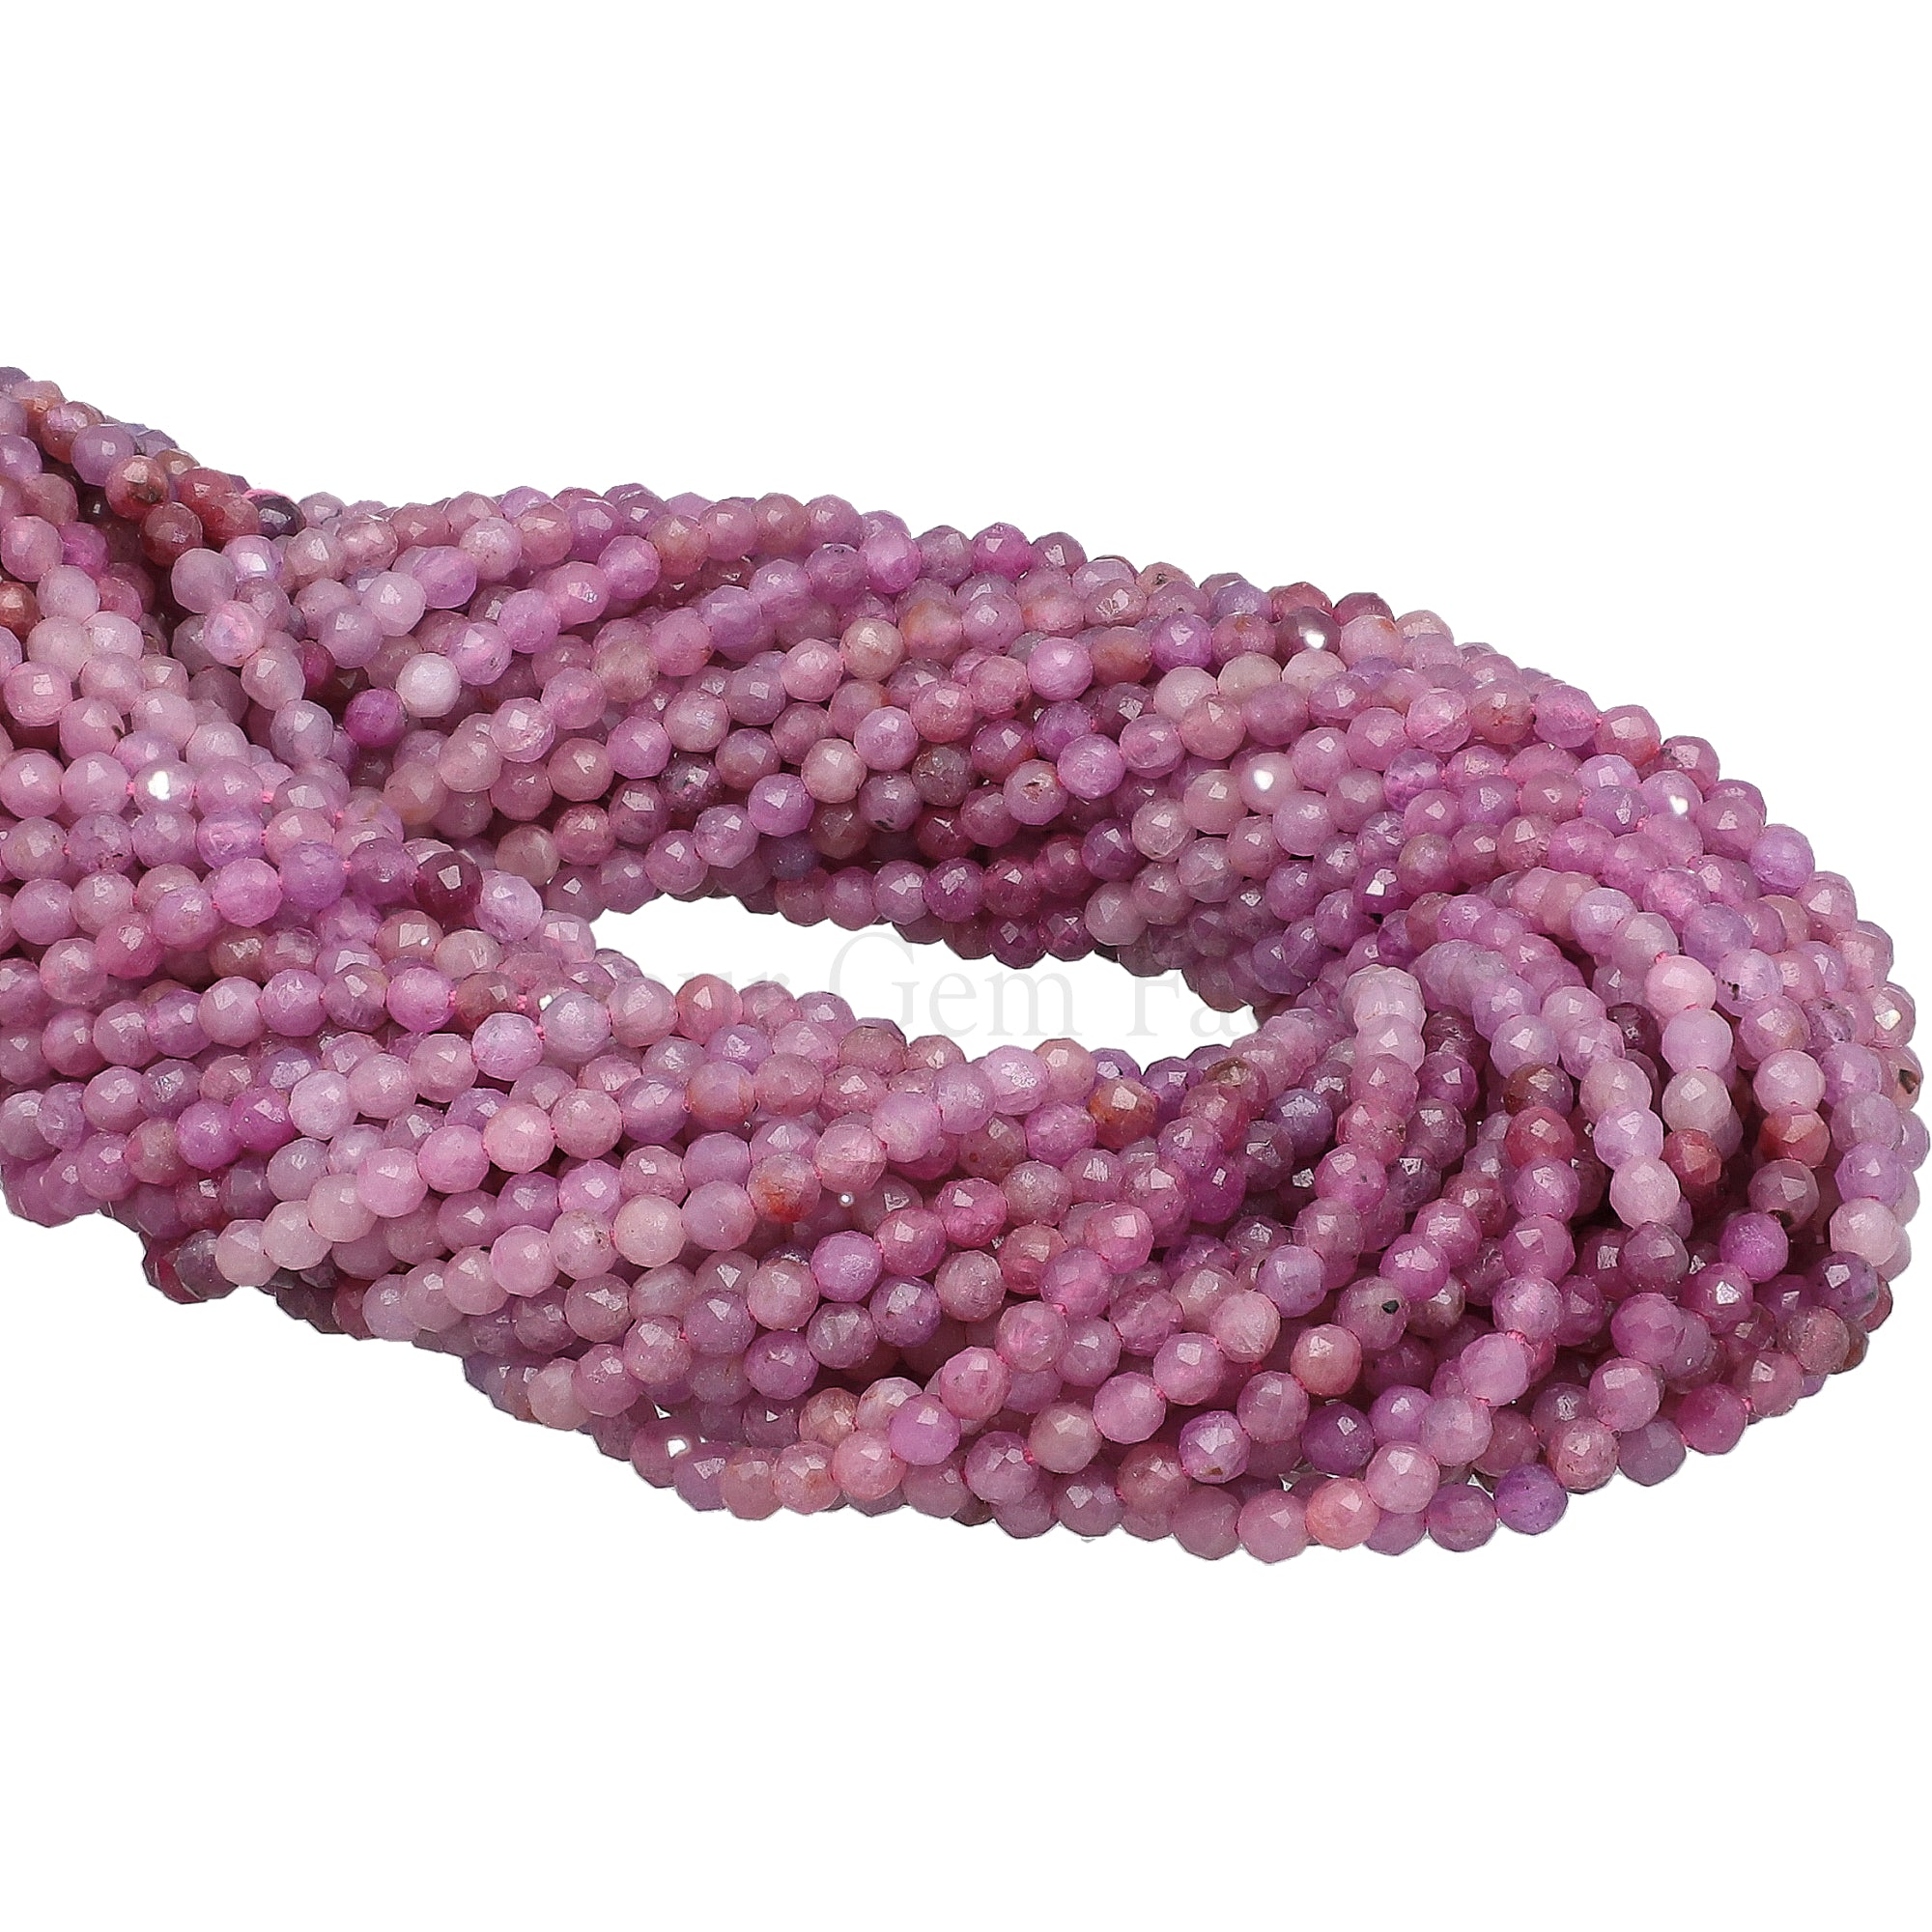 2.5 - 3 MM Natural Pink Sapphire Faceted Round Beads